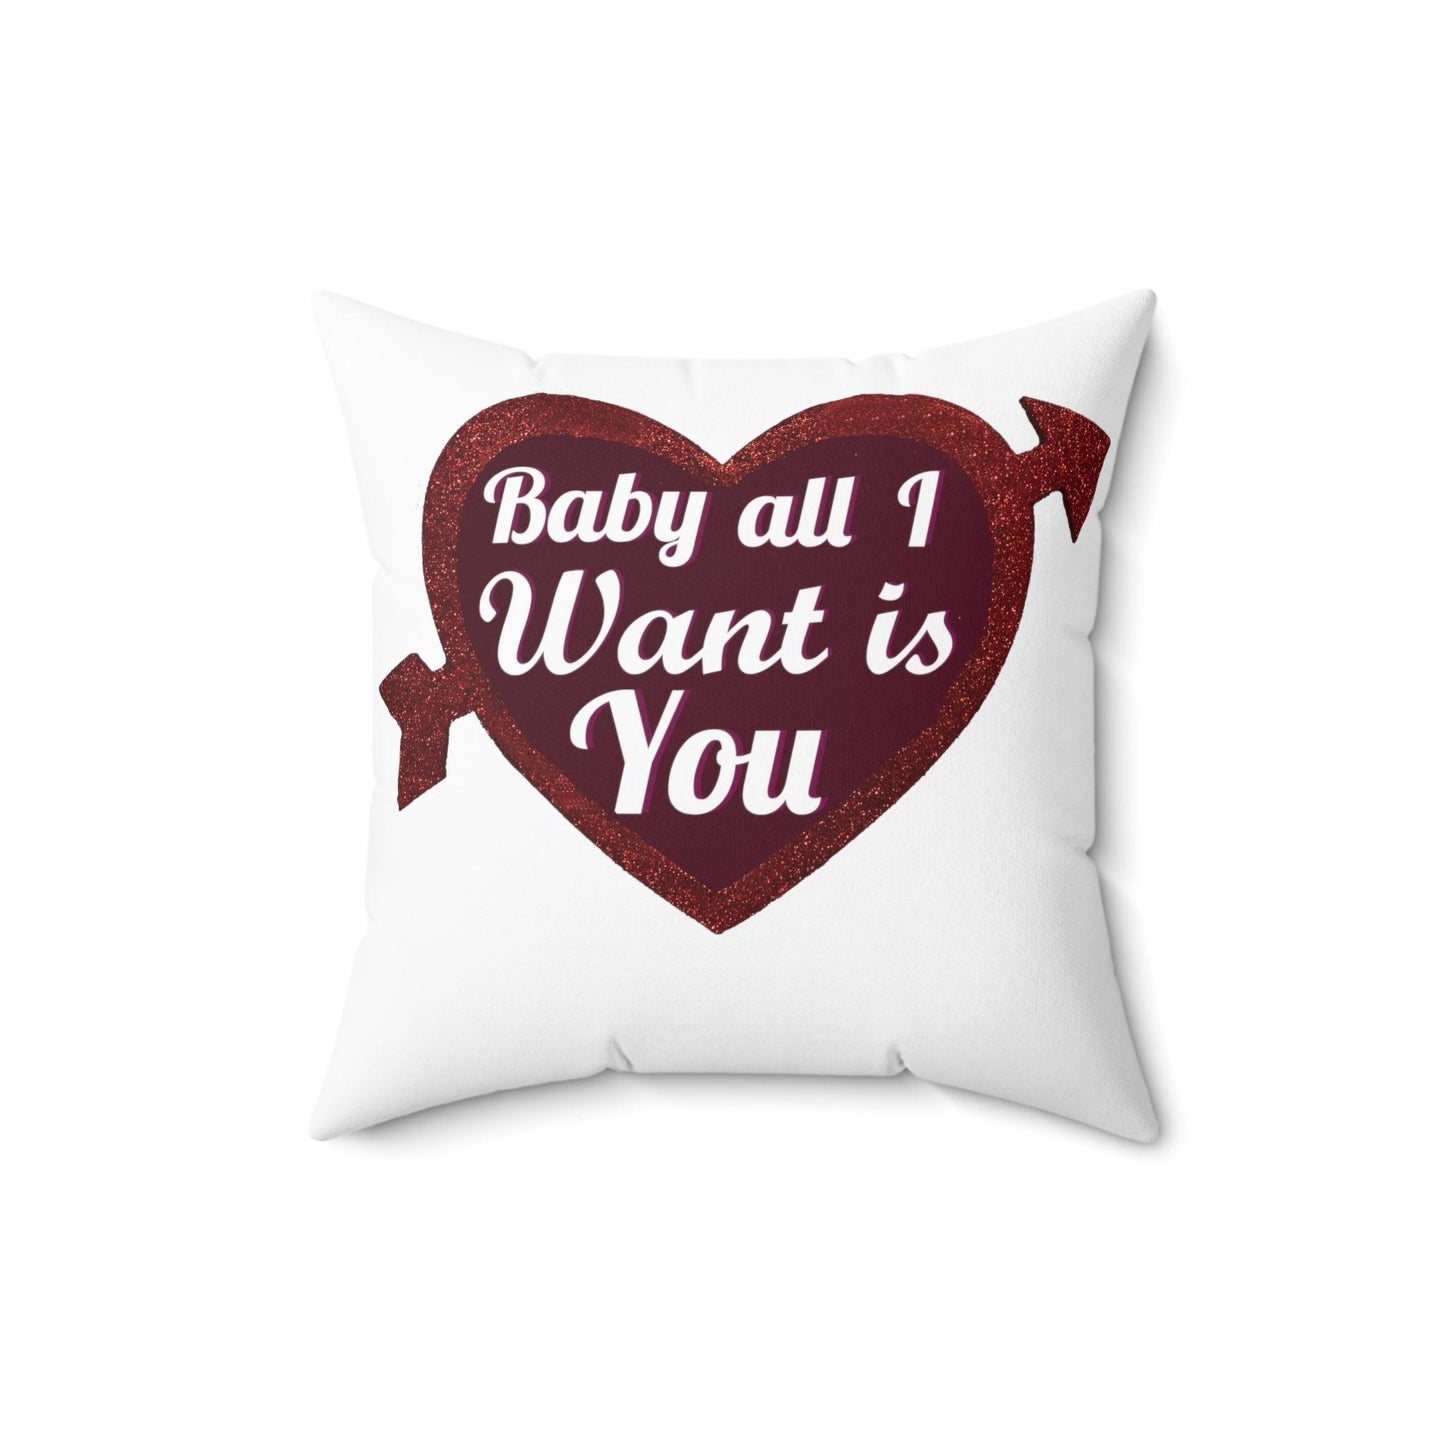 Baby all I want is You Square Pillow